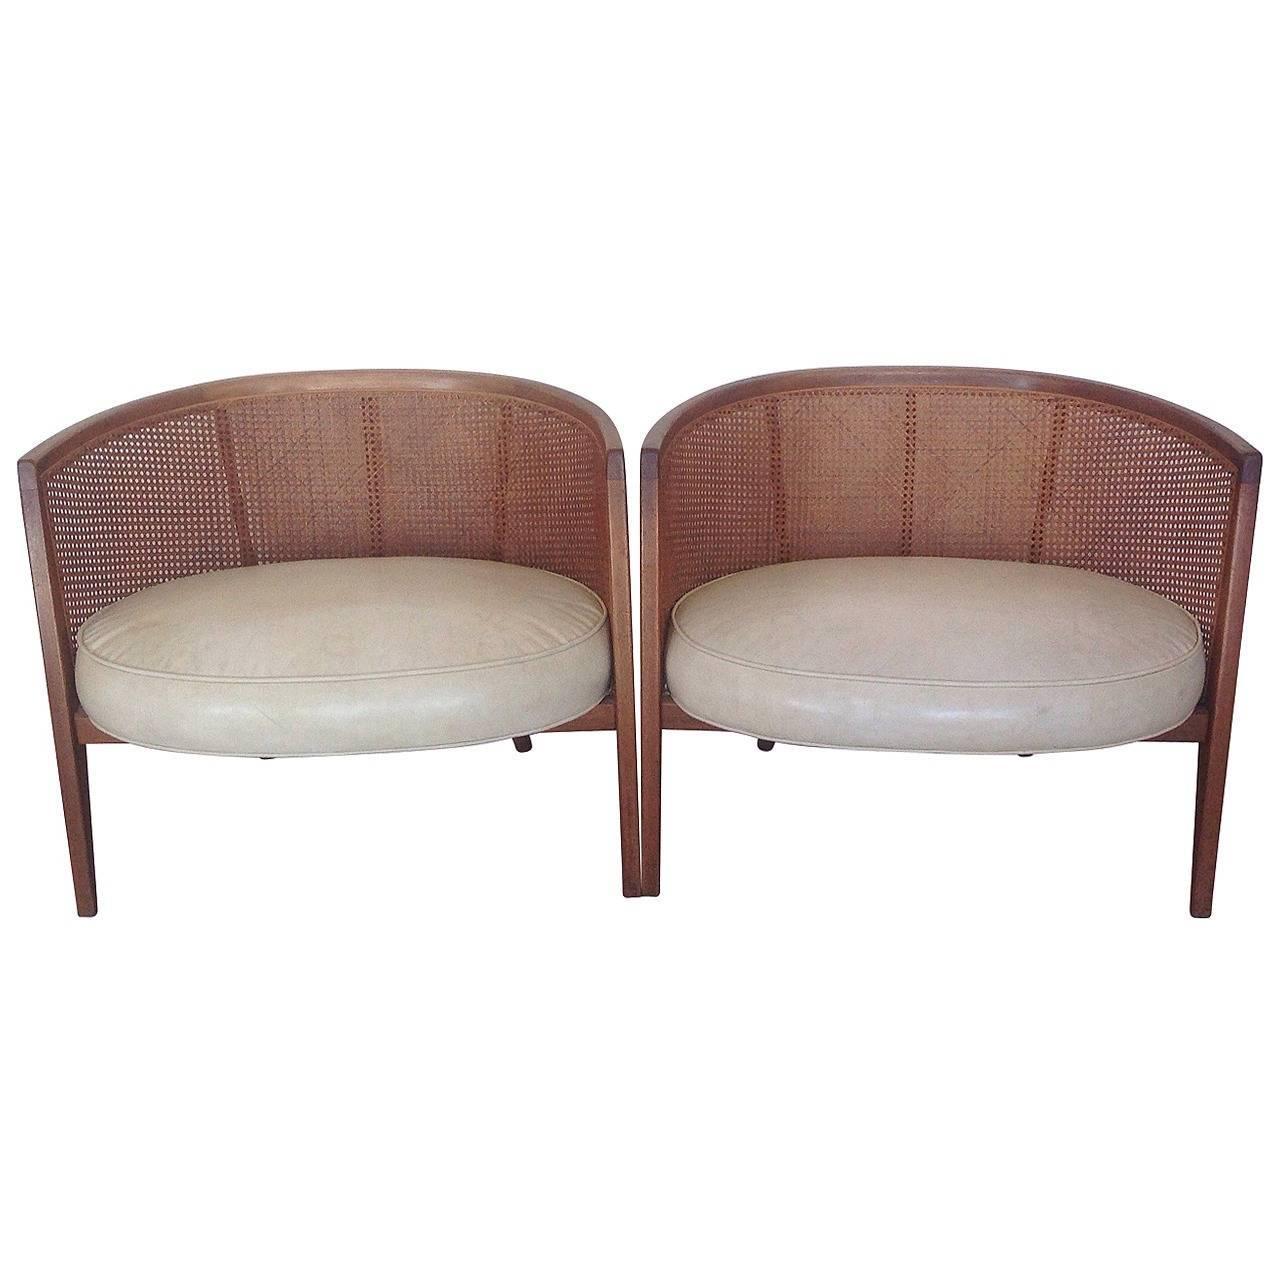 Rare pair of Model 1066 Harvey Probber hoop chairs. Very comfortable and wide sitting area.